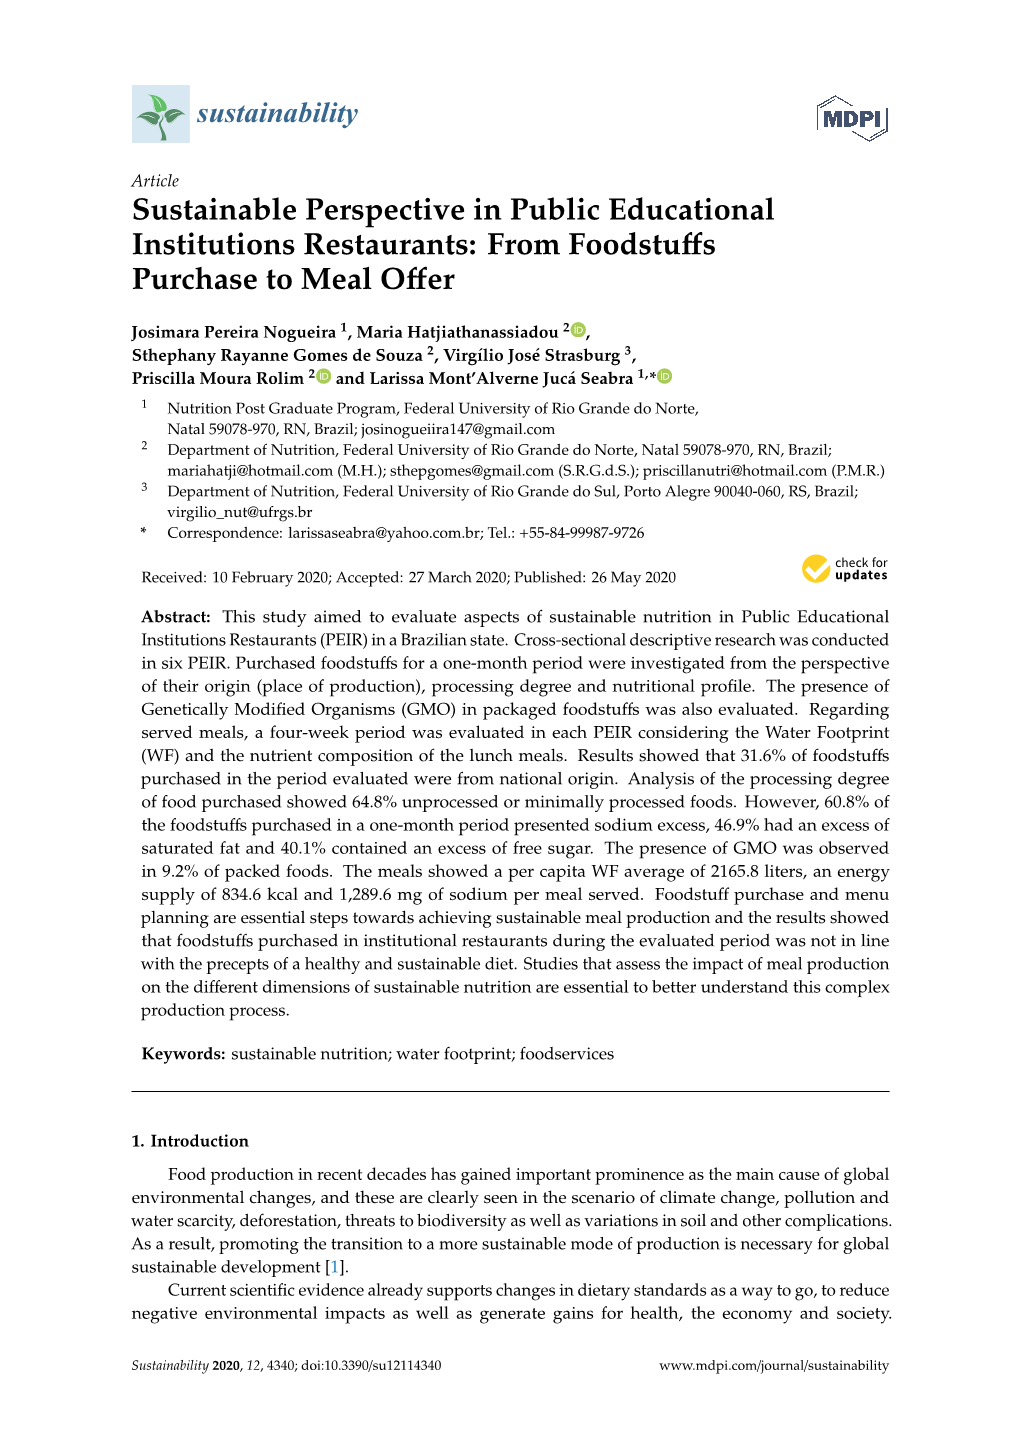 Sustainable Perspective in Public Educational Institutions Restaurants: from Foodstuﬀs Purchase to Meal Oﬀer